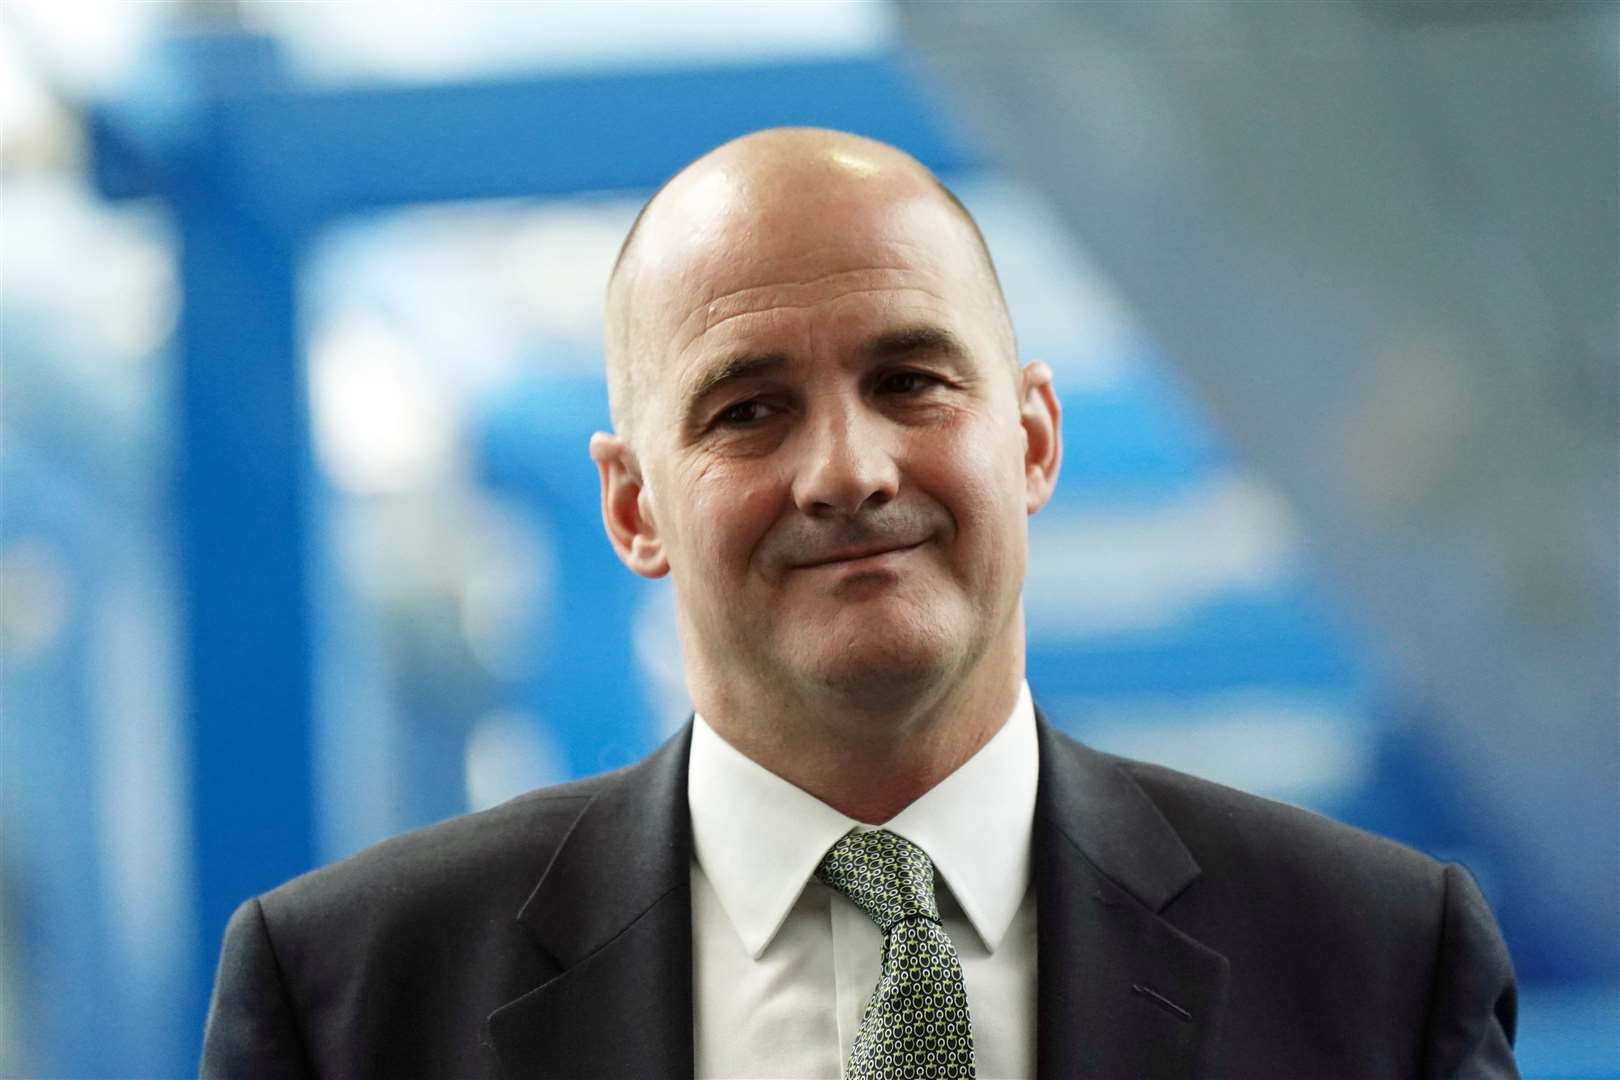 Tory MP Sir Jake Berry said it is ‘unsustainable’ for Mr Zahawi to remain in position (Aaron Chown/PA)